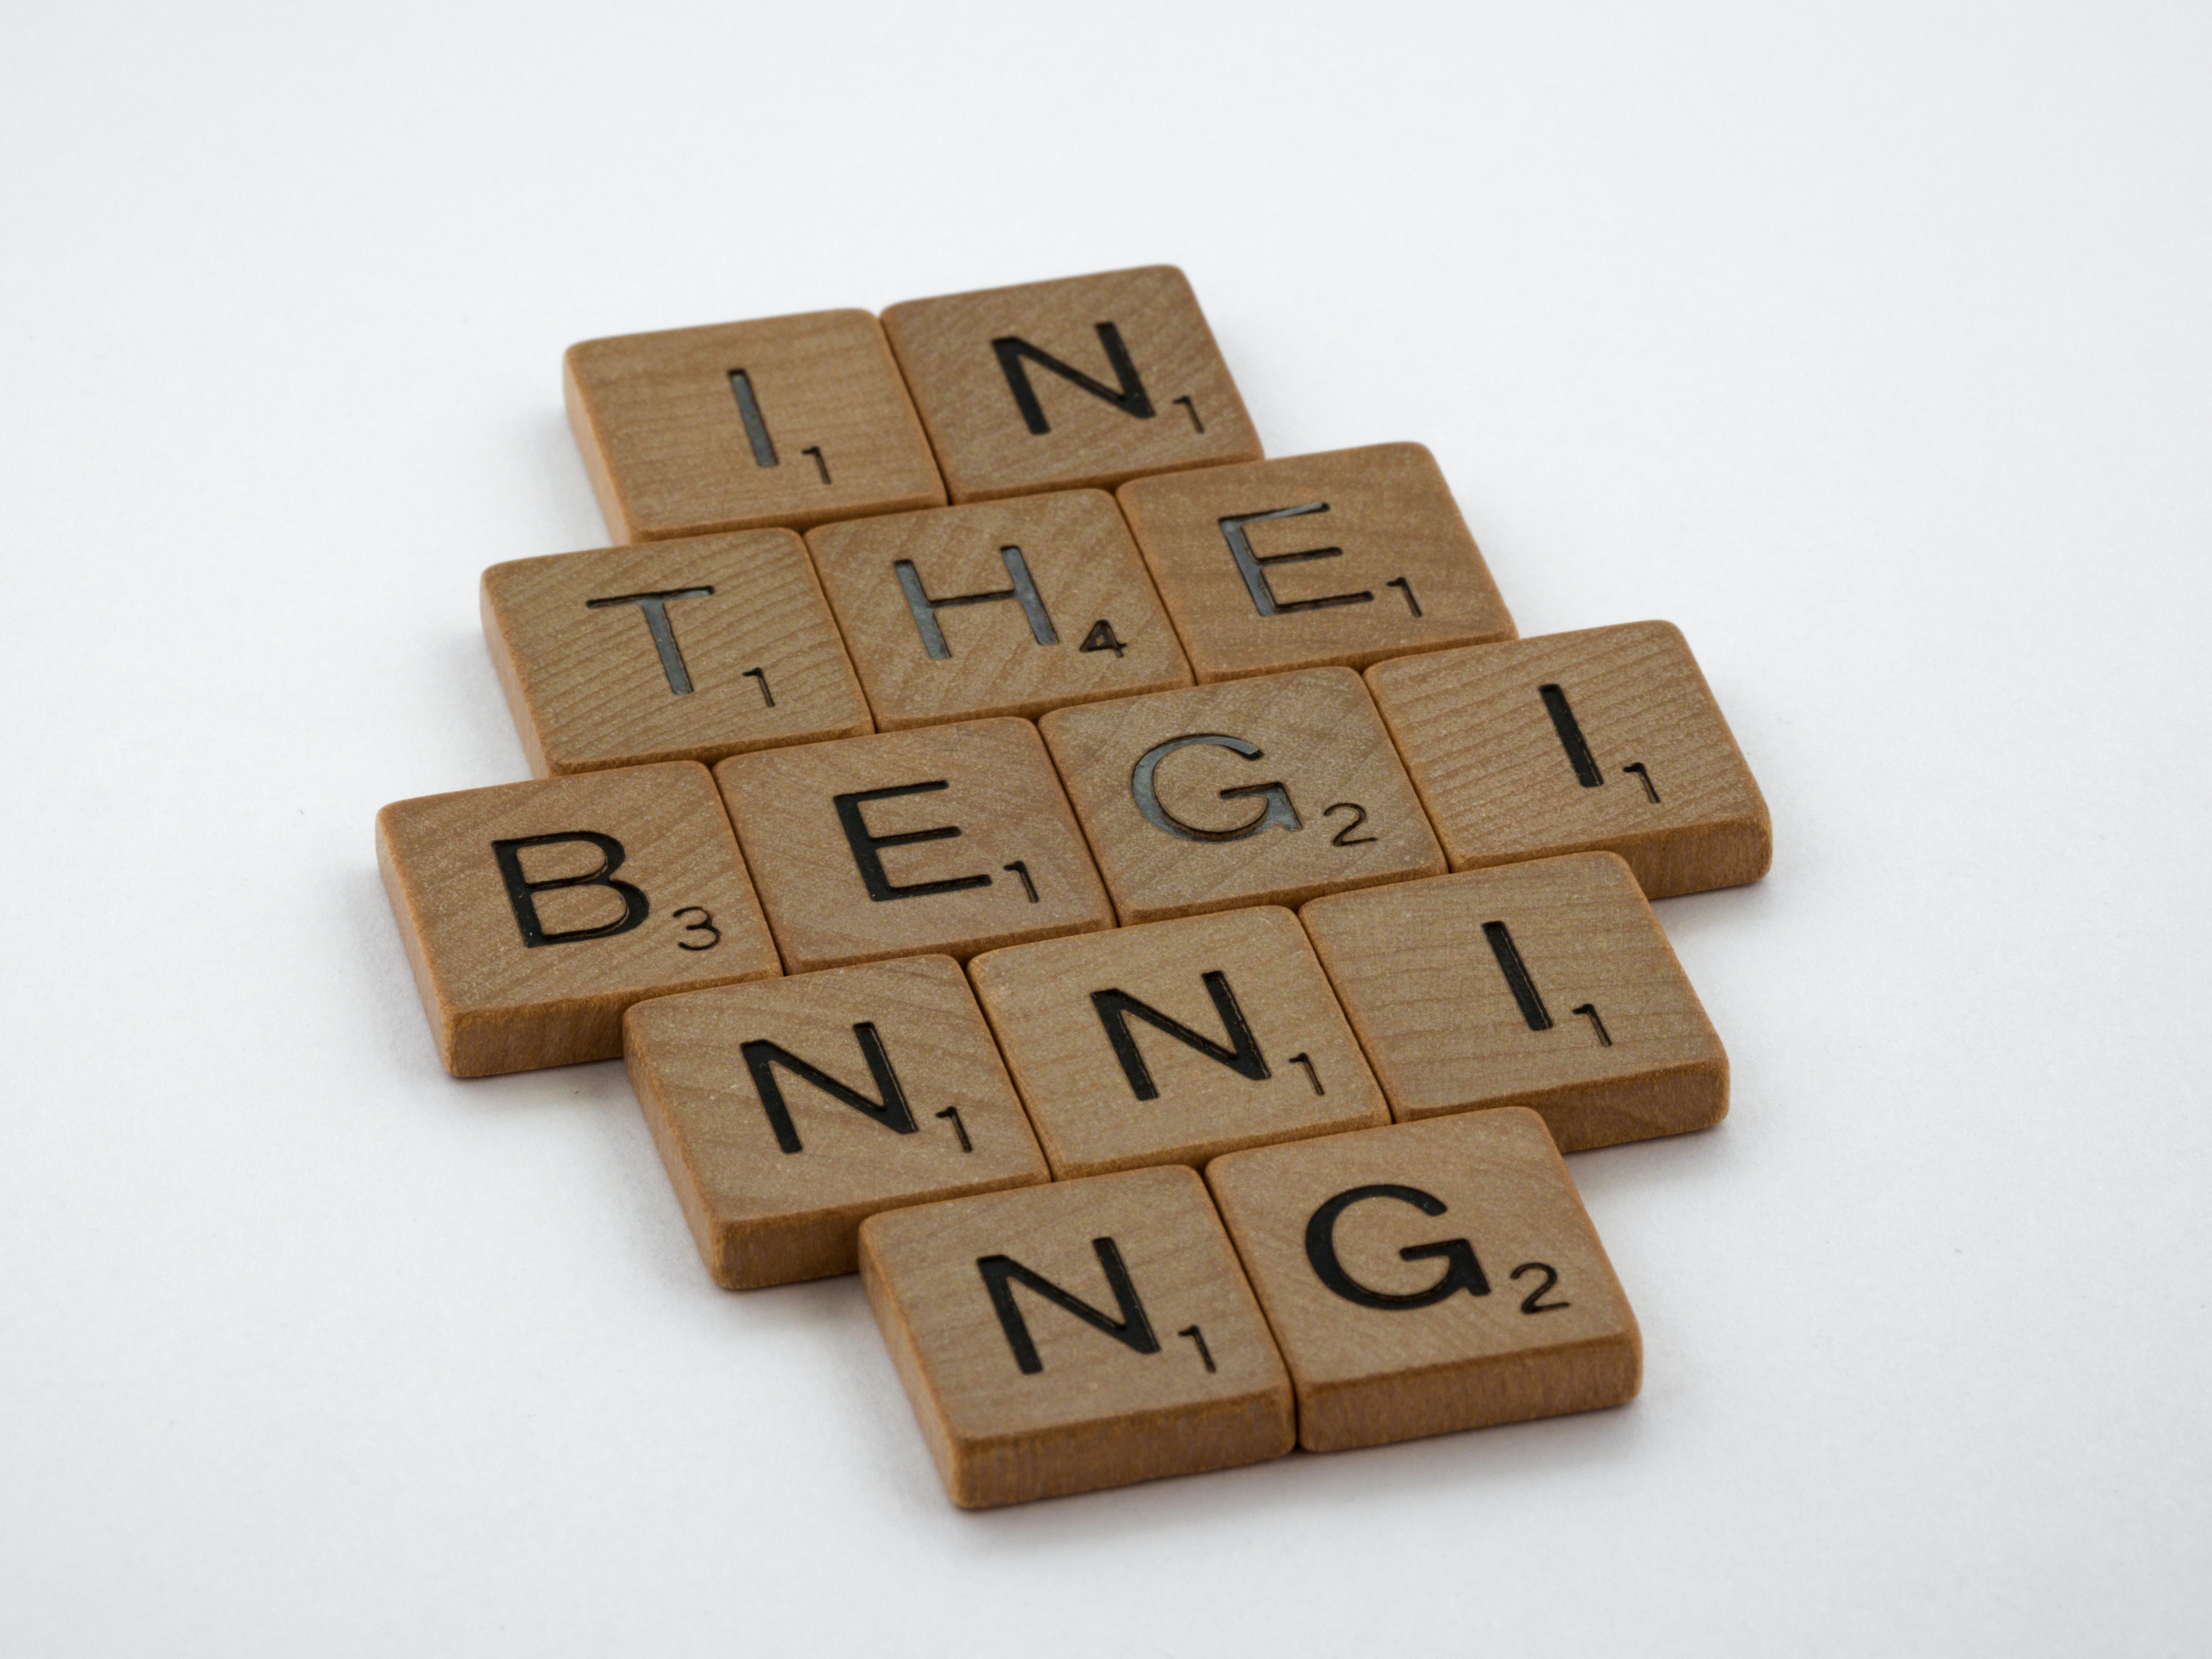 picture of scrabble tiles spelling out "in the beginning"